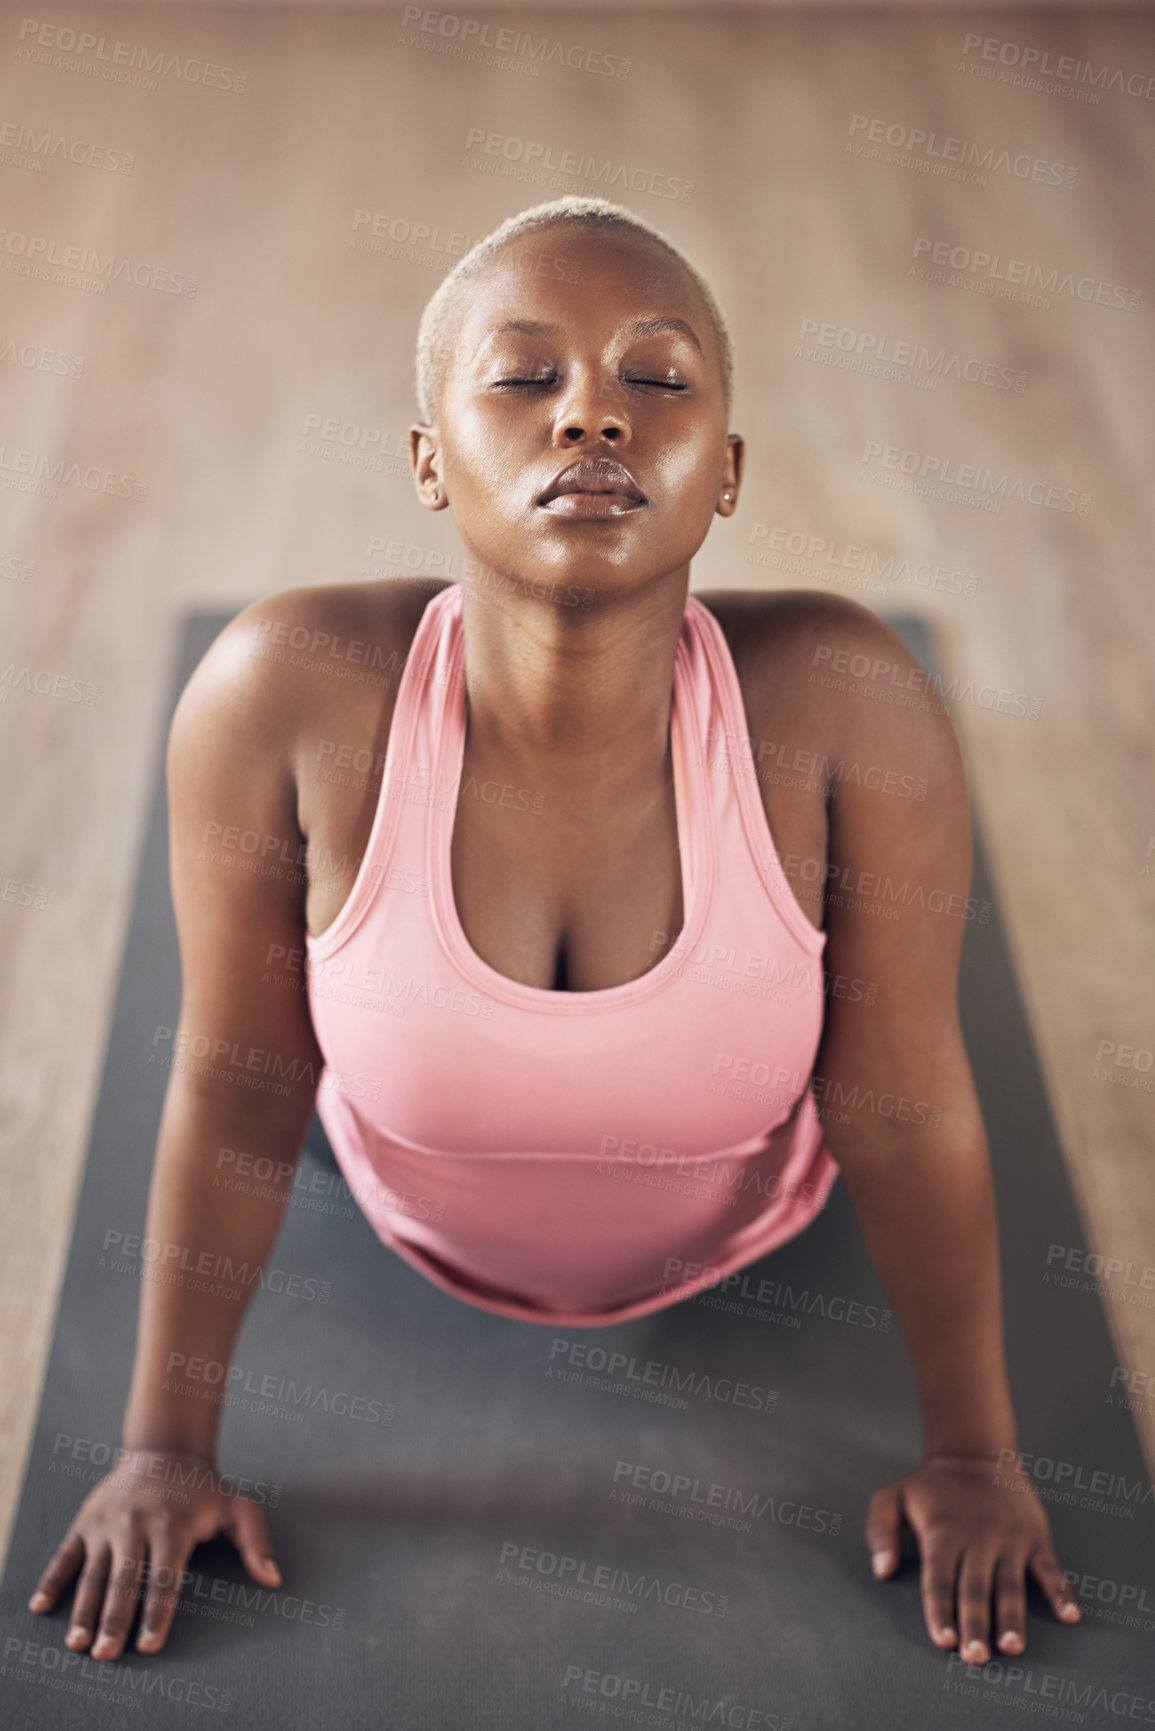 Buy stock photo Cropped shot of an attractive young woman holding an upward facing dog pose during an indoor yoga session alone